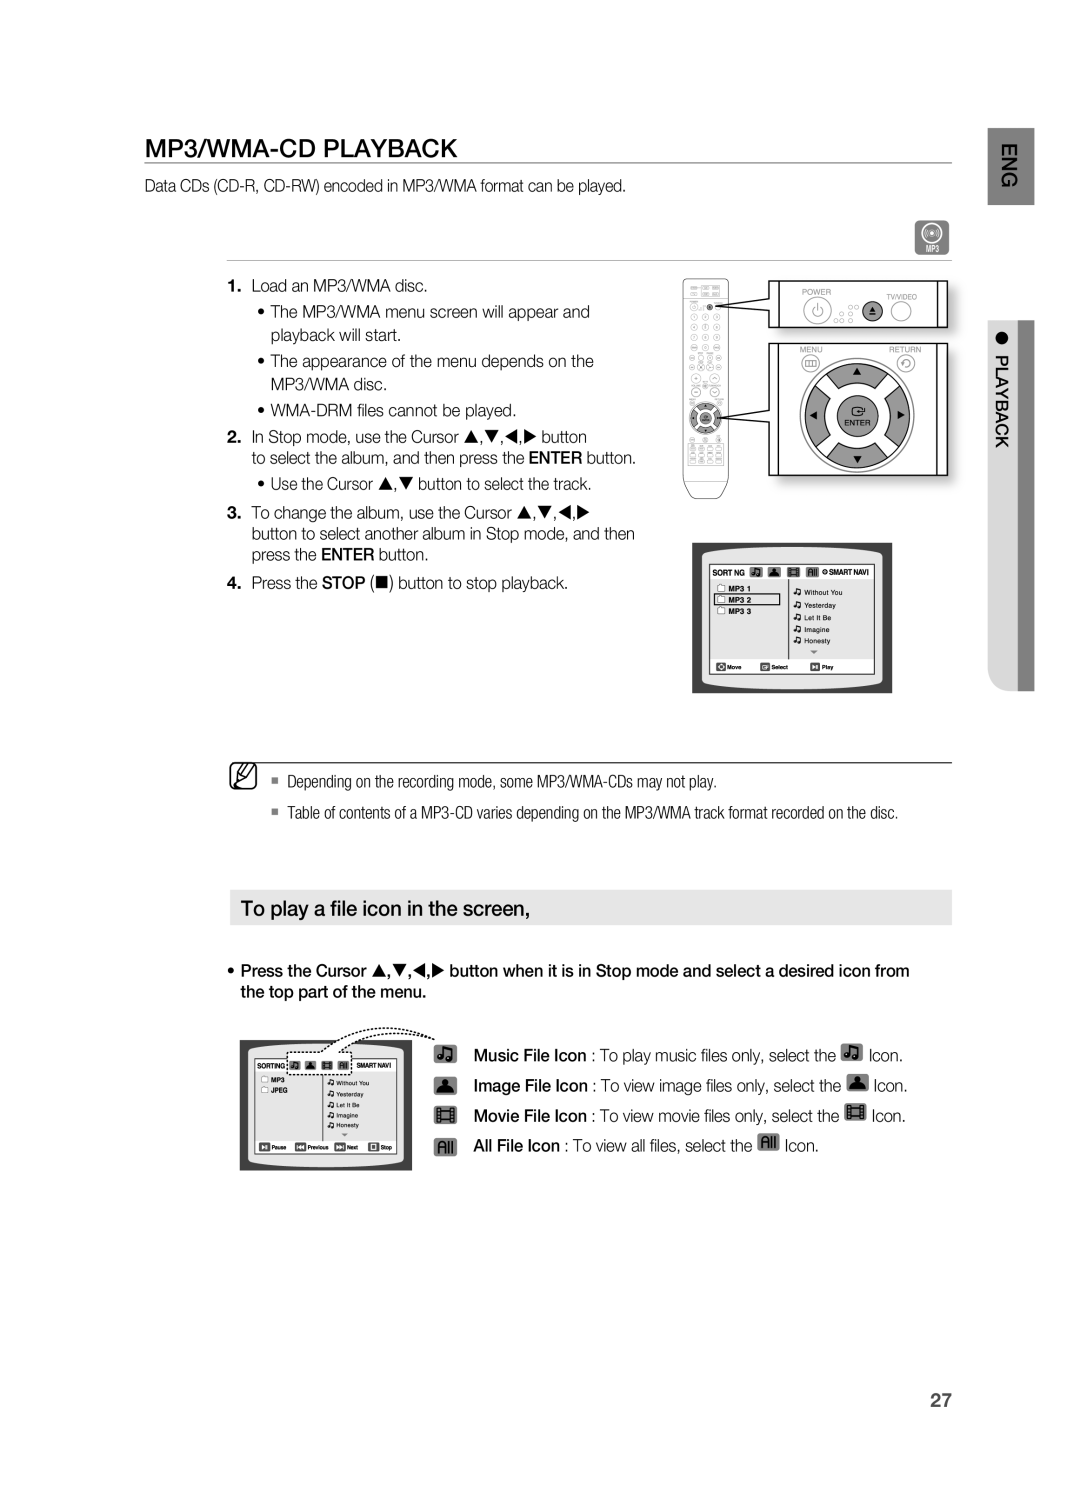 Samsung HT-X810 user manual MP3/WMA-CDPlAYBACK, To play a file icon in the screen 